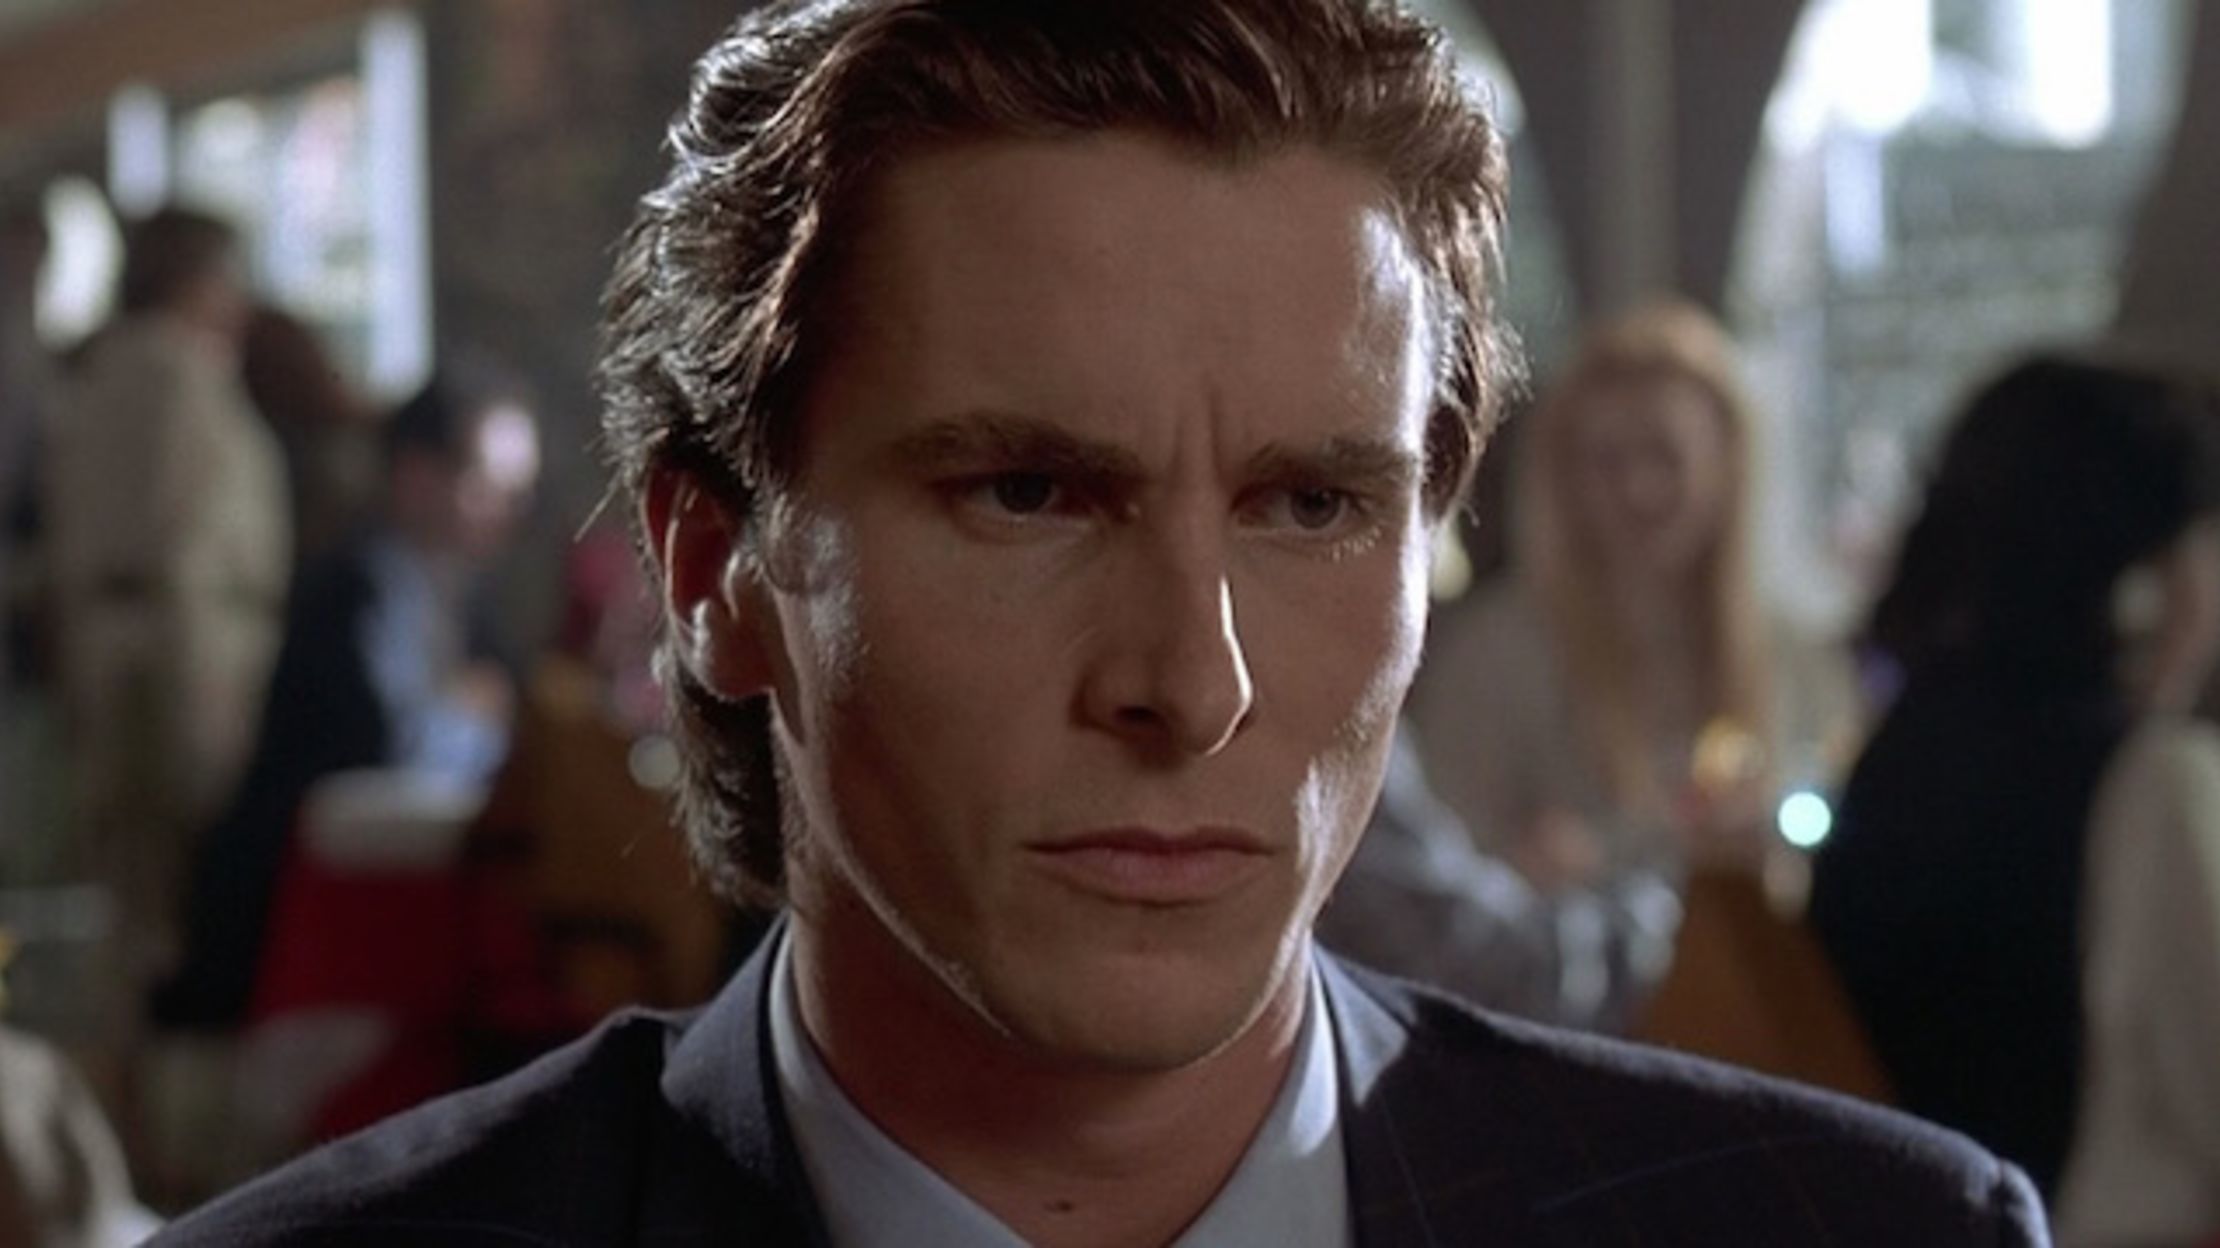 19 Things You Might Not Know About 'American Psycho' | Mental Floss